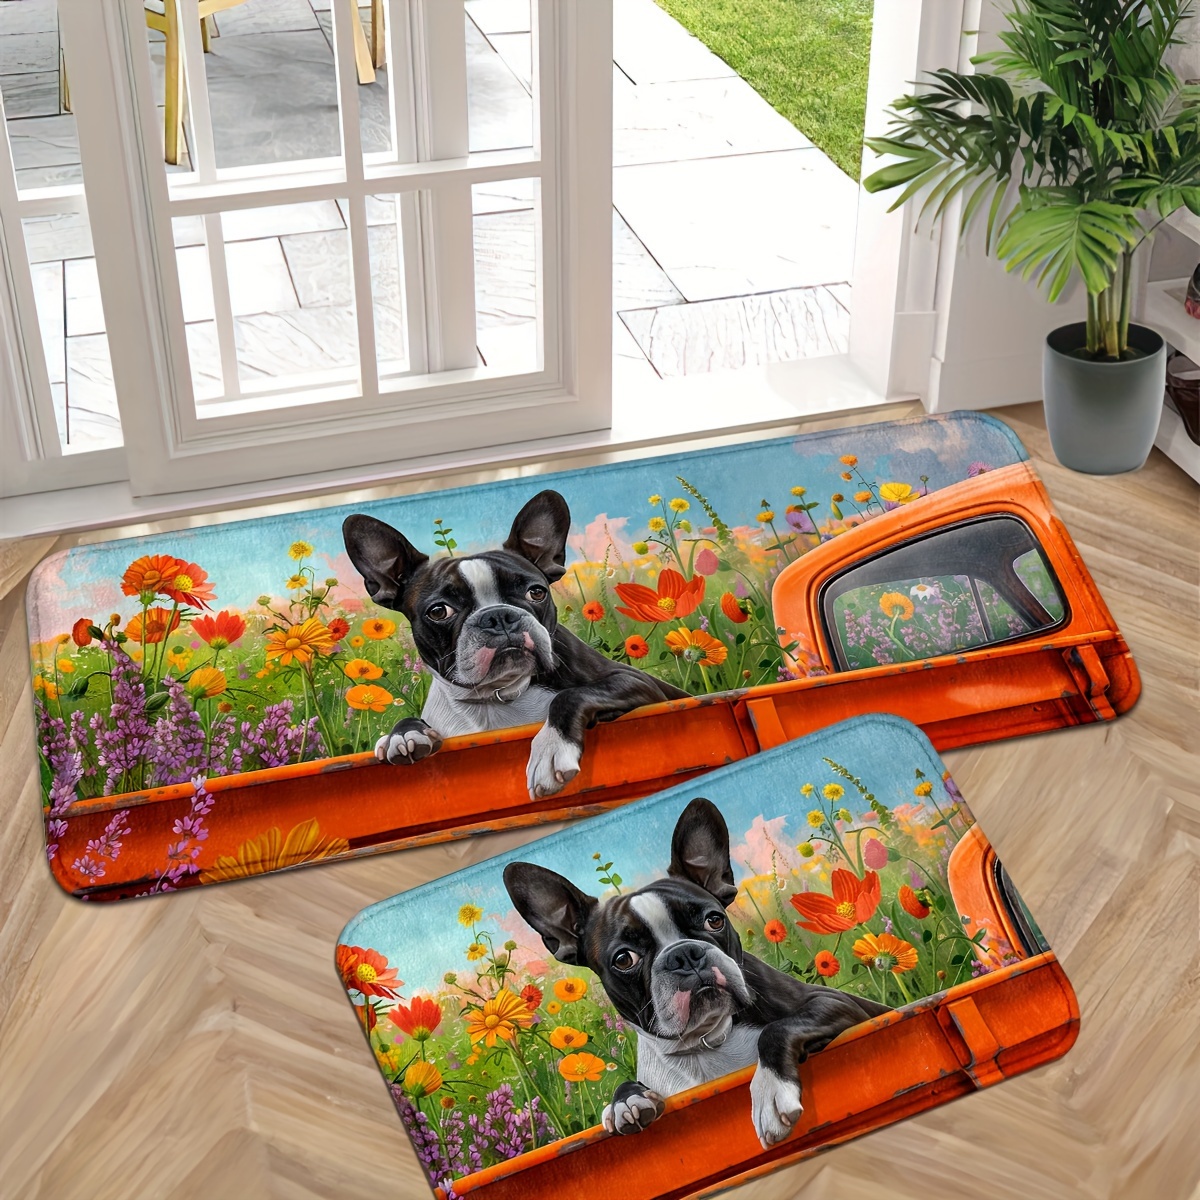 

welcoming Paws" Boston Terrier & Wild Flowers Door Mat Set - Non-slip, Washable Entrance Mats For Kitchen, Bathroom, Laundry Room - Durable Polyester Runner Rugs